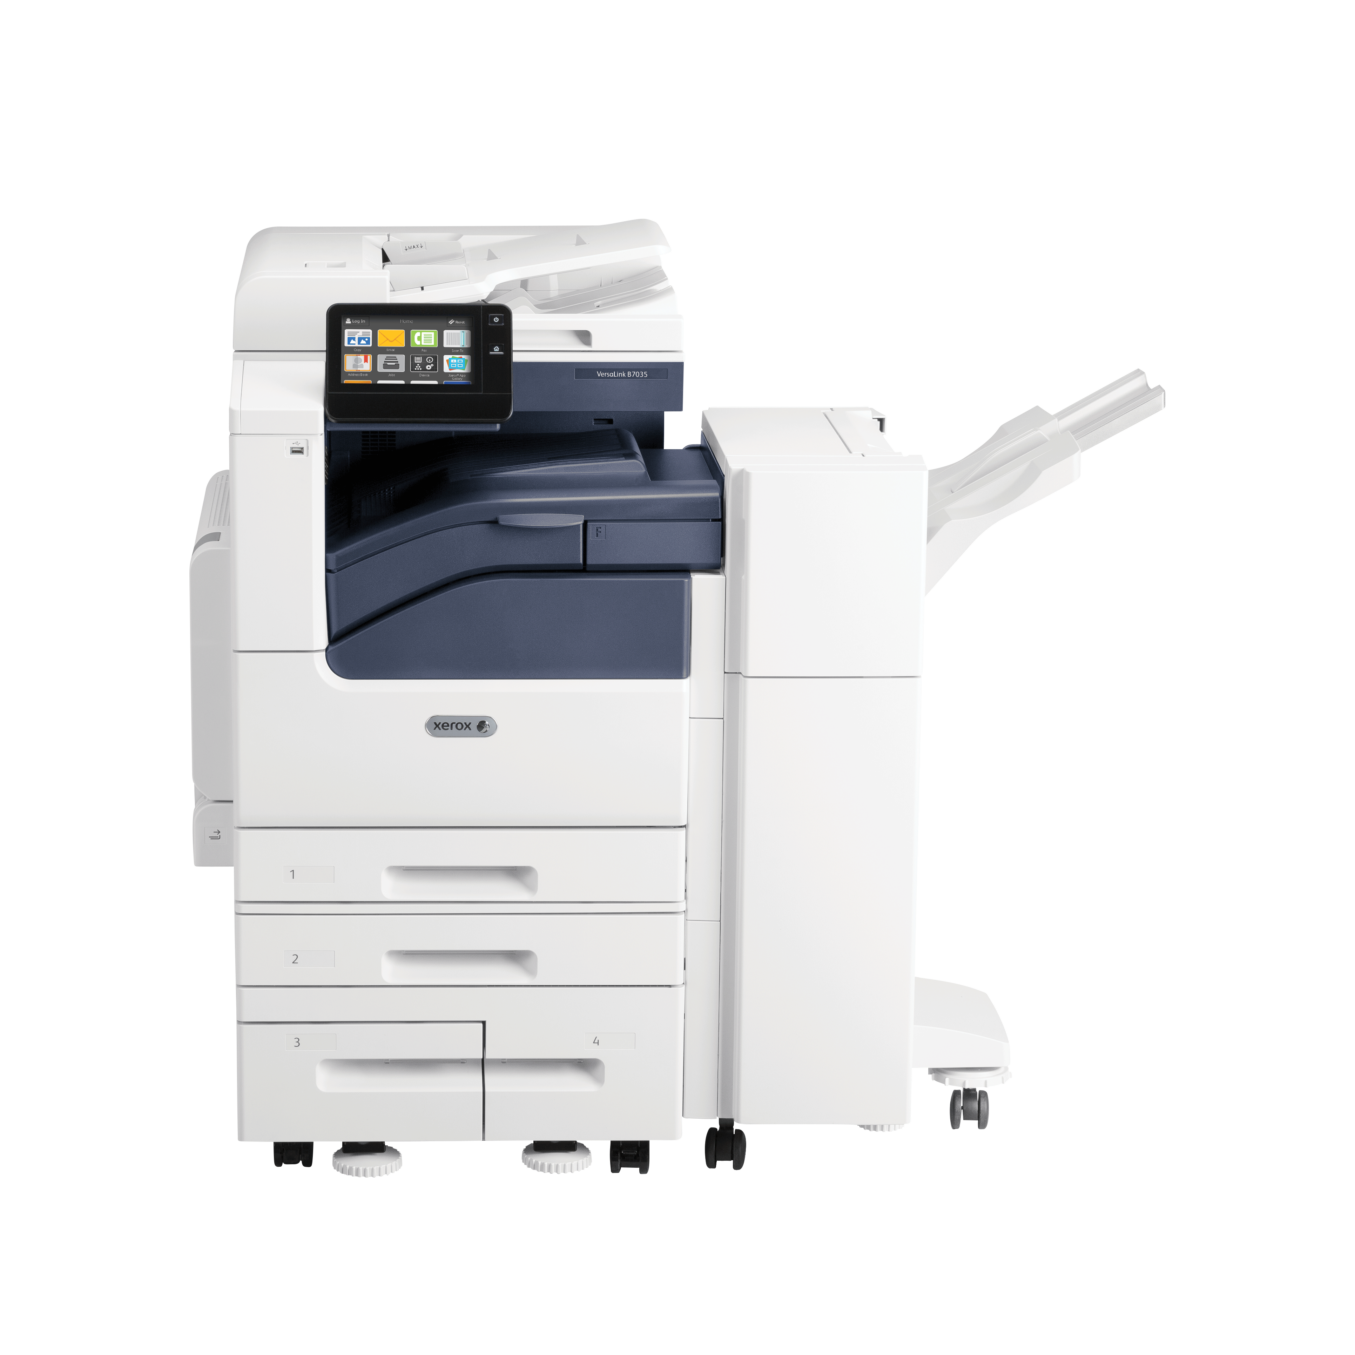 versalink, mfp with finisher, Xerox, LSI, Logistical Support, Inc., Xerox, HP, Oregon, Copier, Printer, MFP, Sales, Service, Supplies